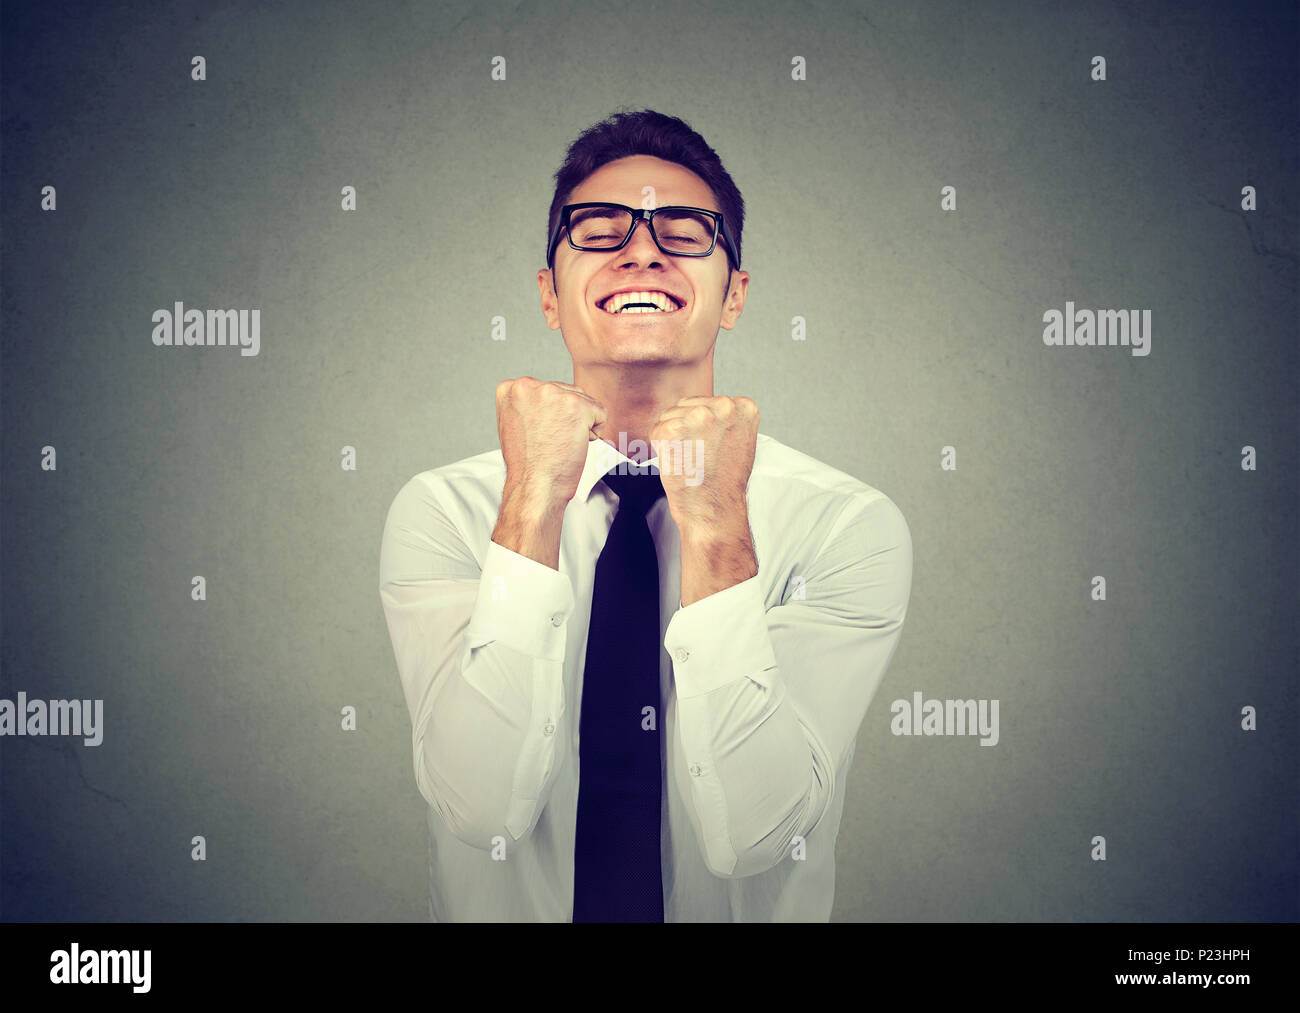 Successful business man with fists pumped celebrating success isolated on grey background. Positive human emotion facial expression. Stock Photo